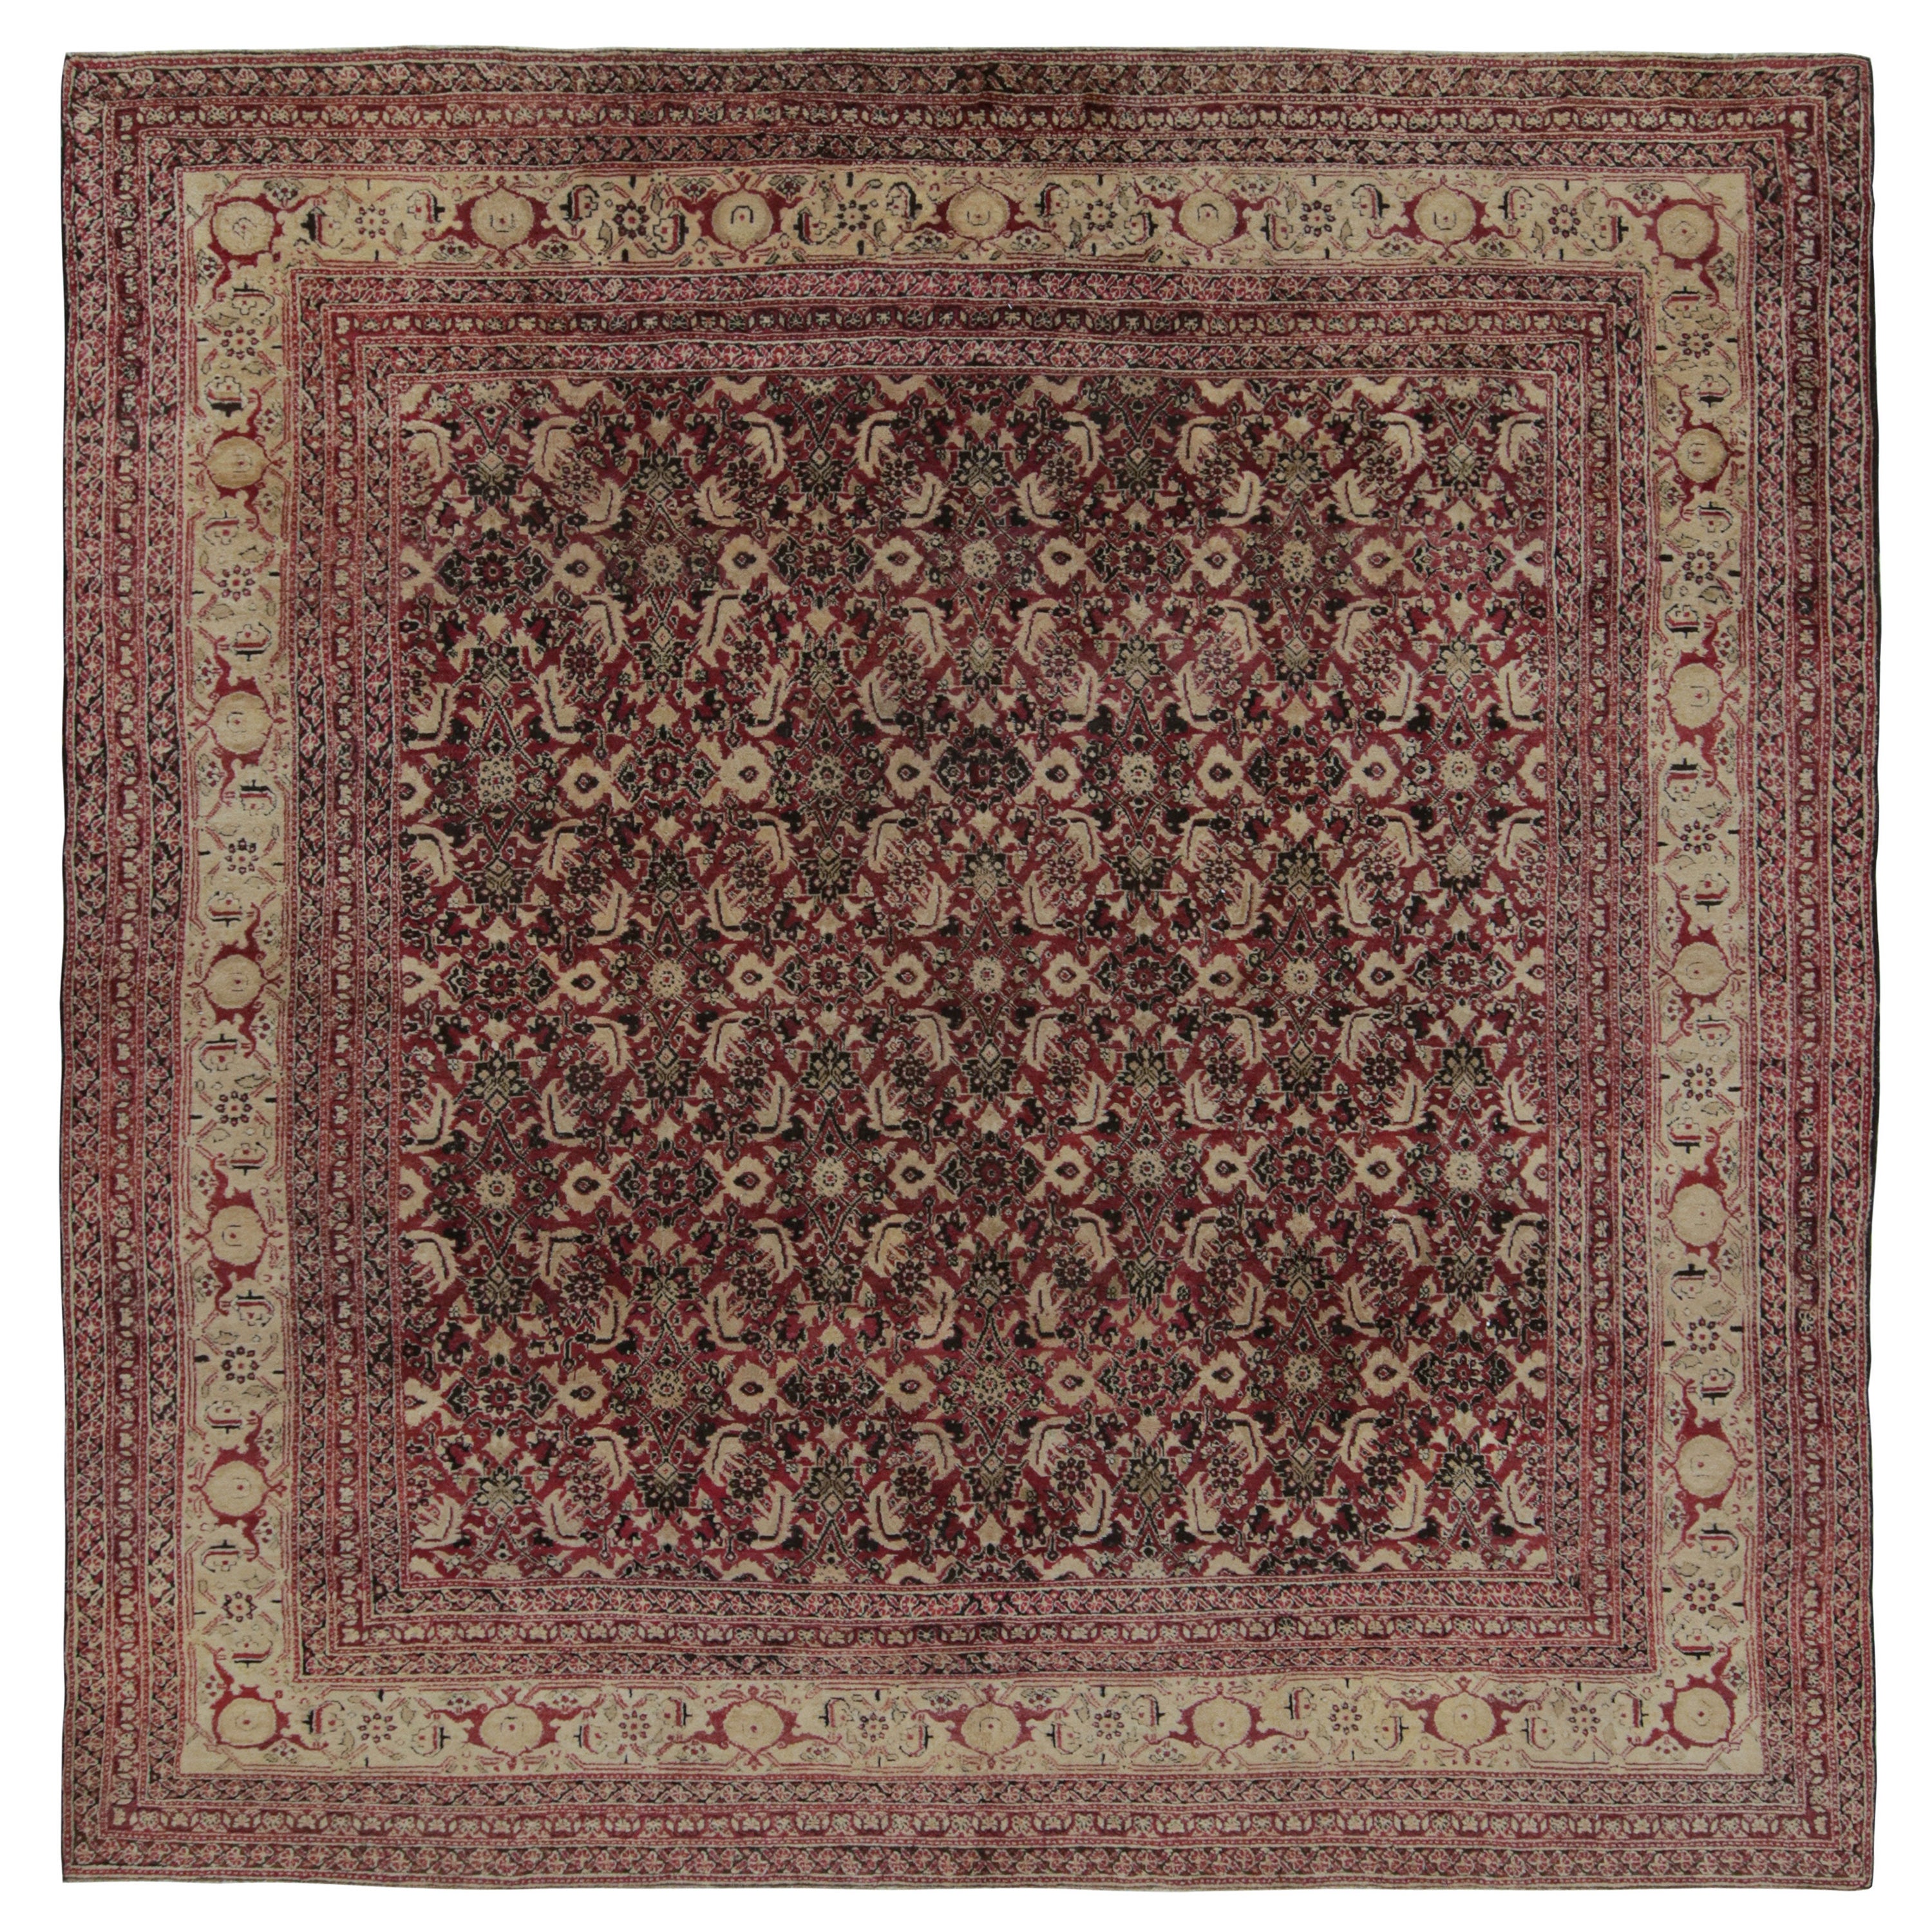 Antique Agra Square Rug in Burgundy with Floral Patterns, from Rug & Kilim